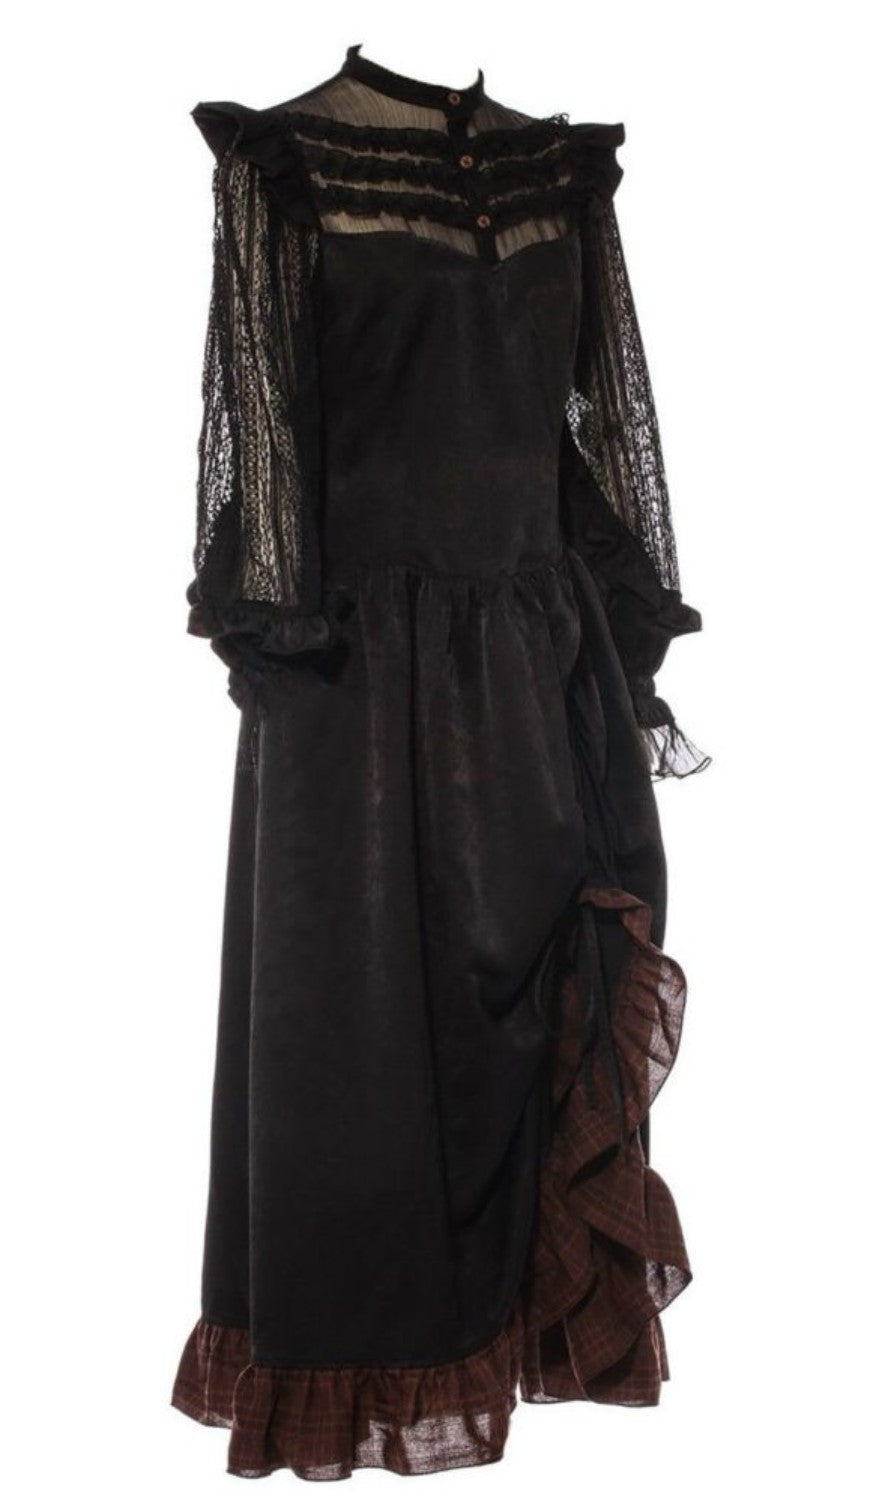 Black Lace Steampunk Dress with Ruffle Hem and Bishop Sleeves